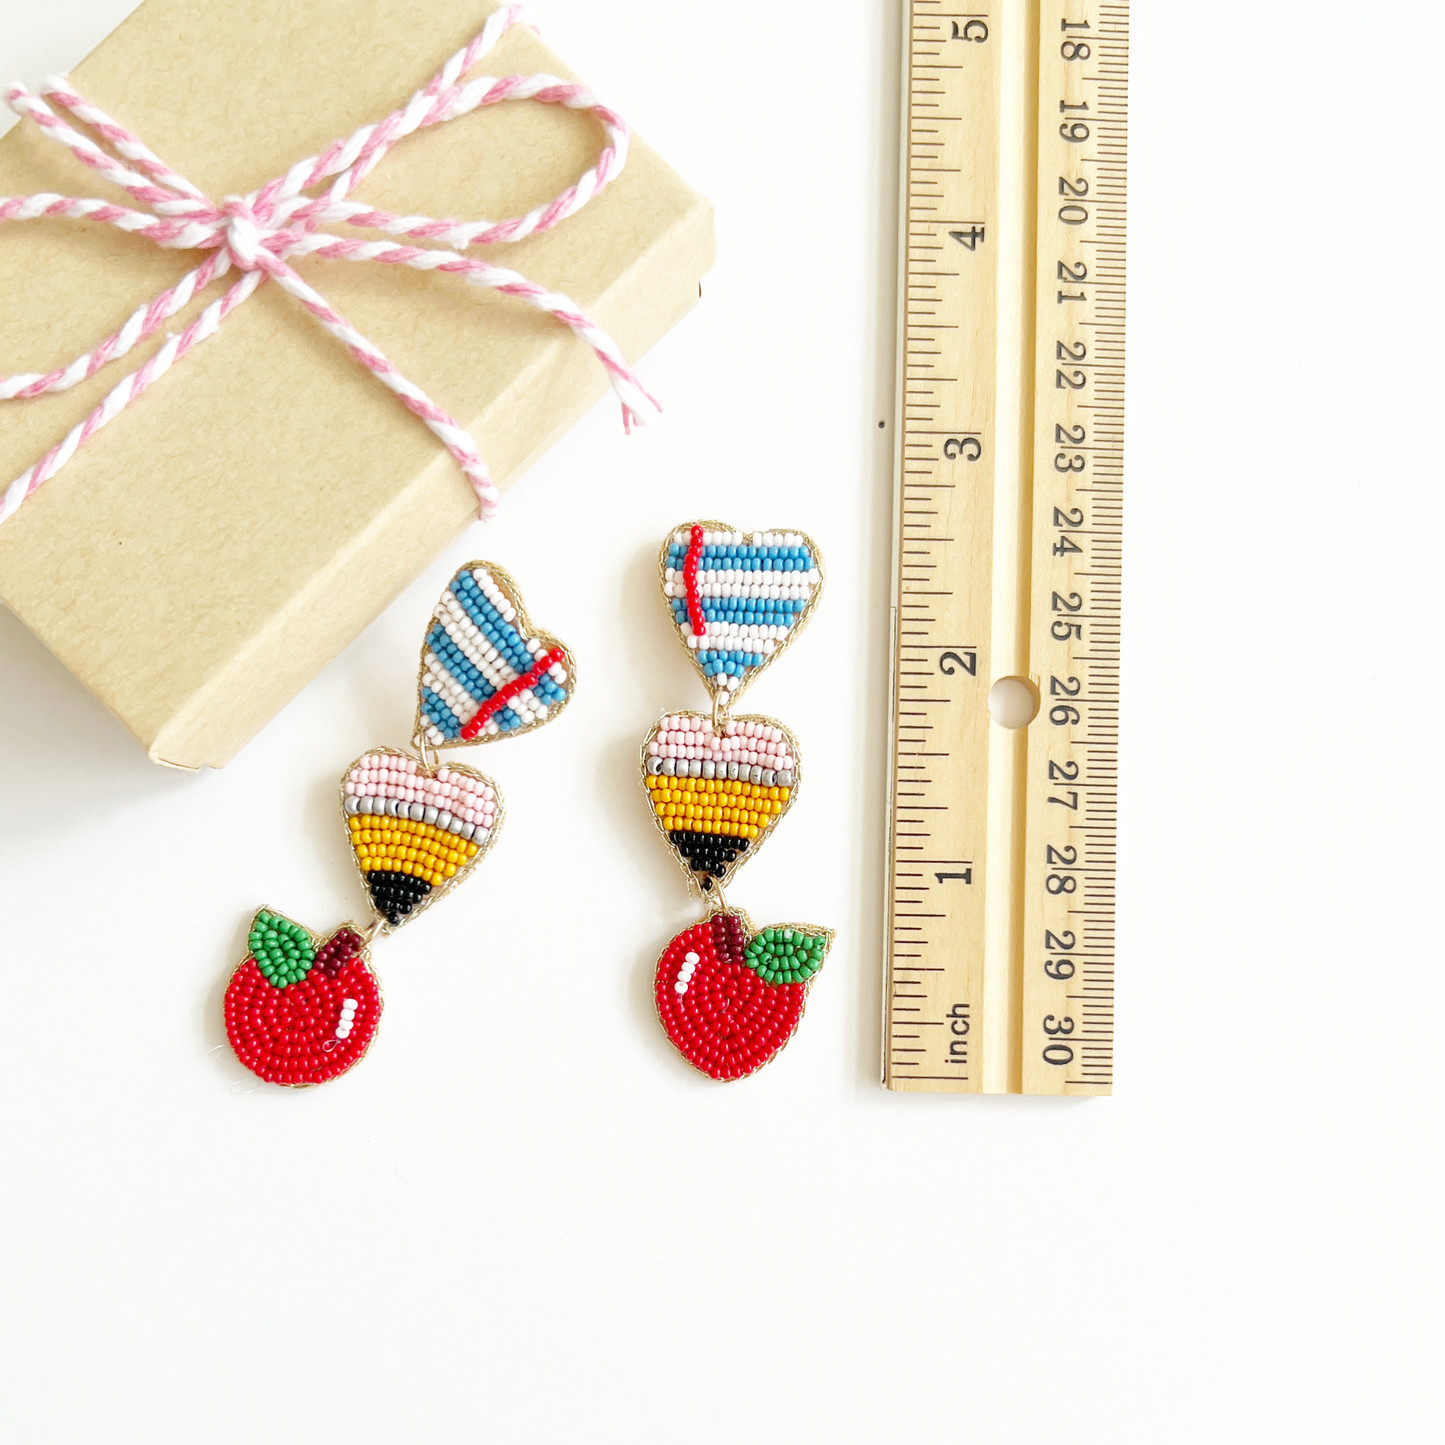 hand beaded school earrings laying next to small gift box and ruler showing they are roughly 2.5 inches long